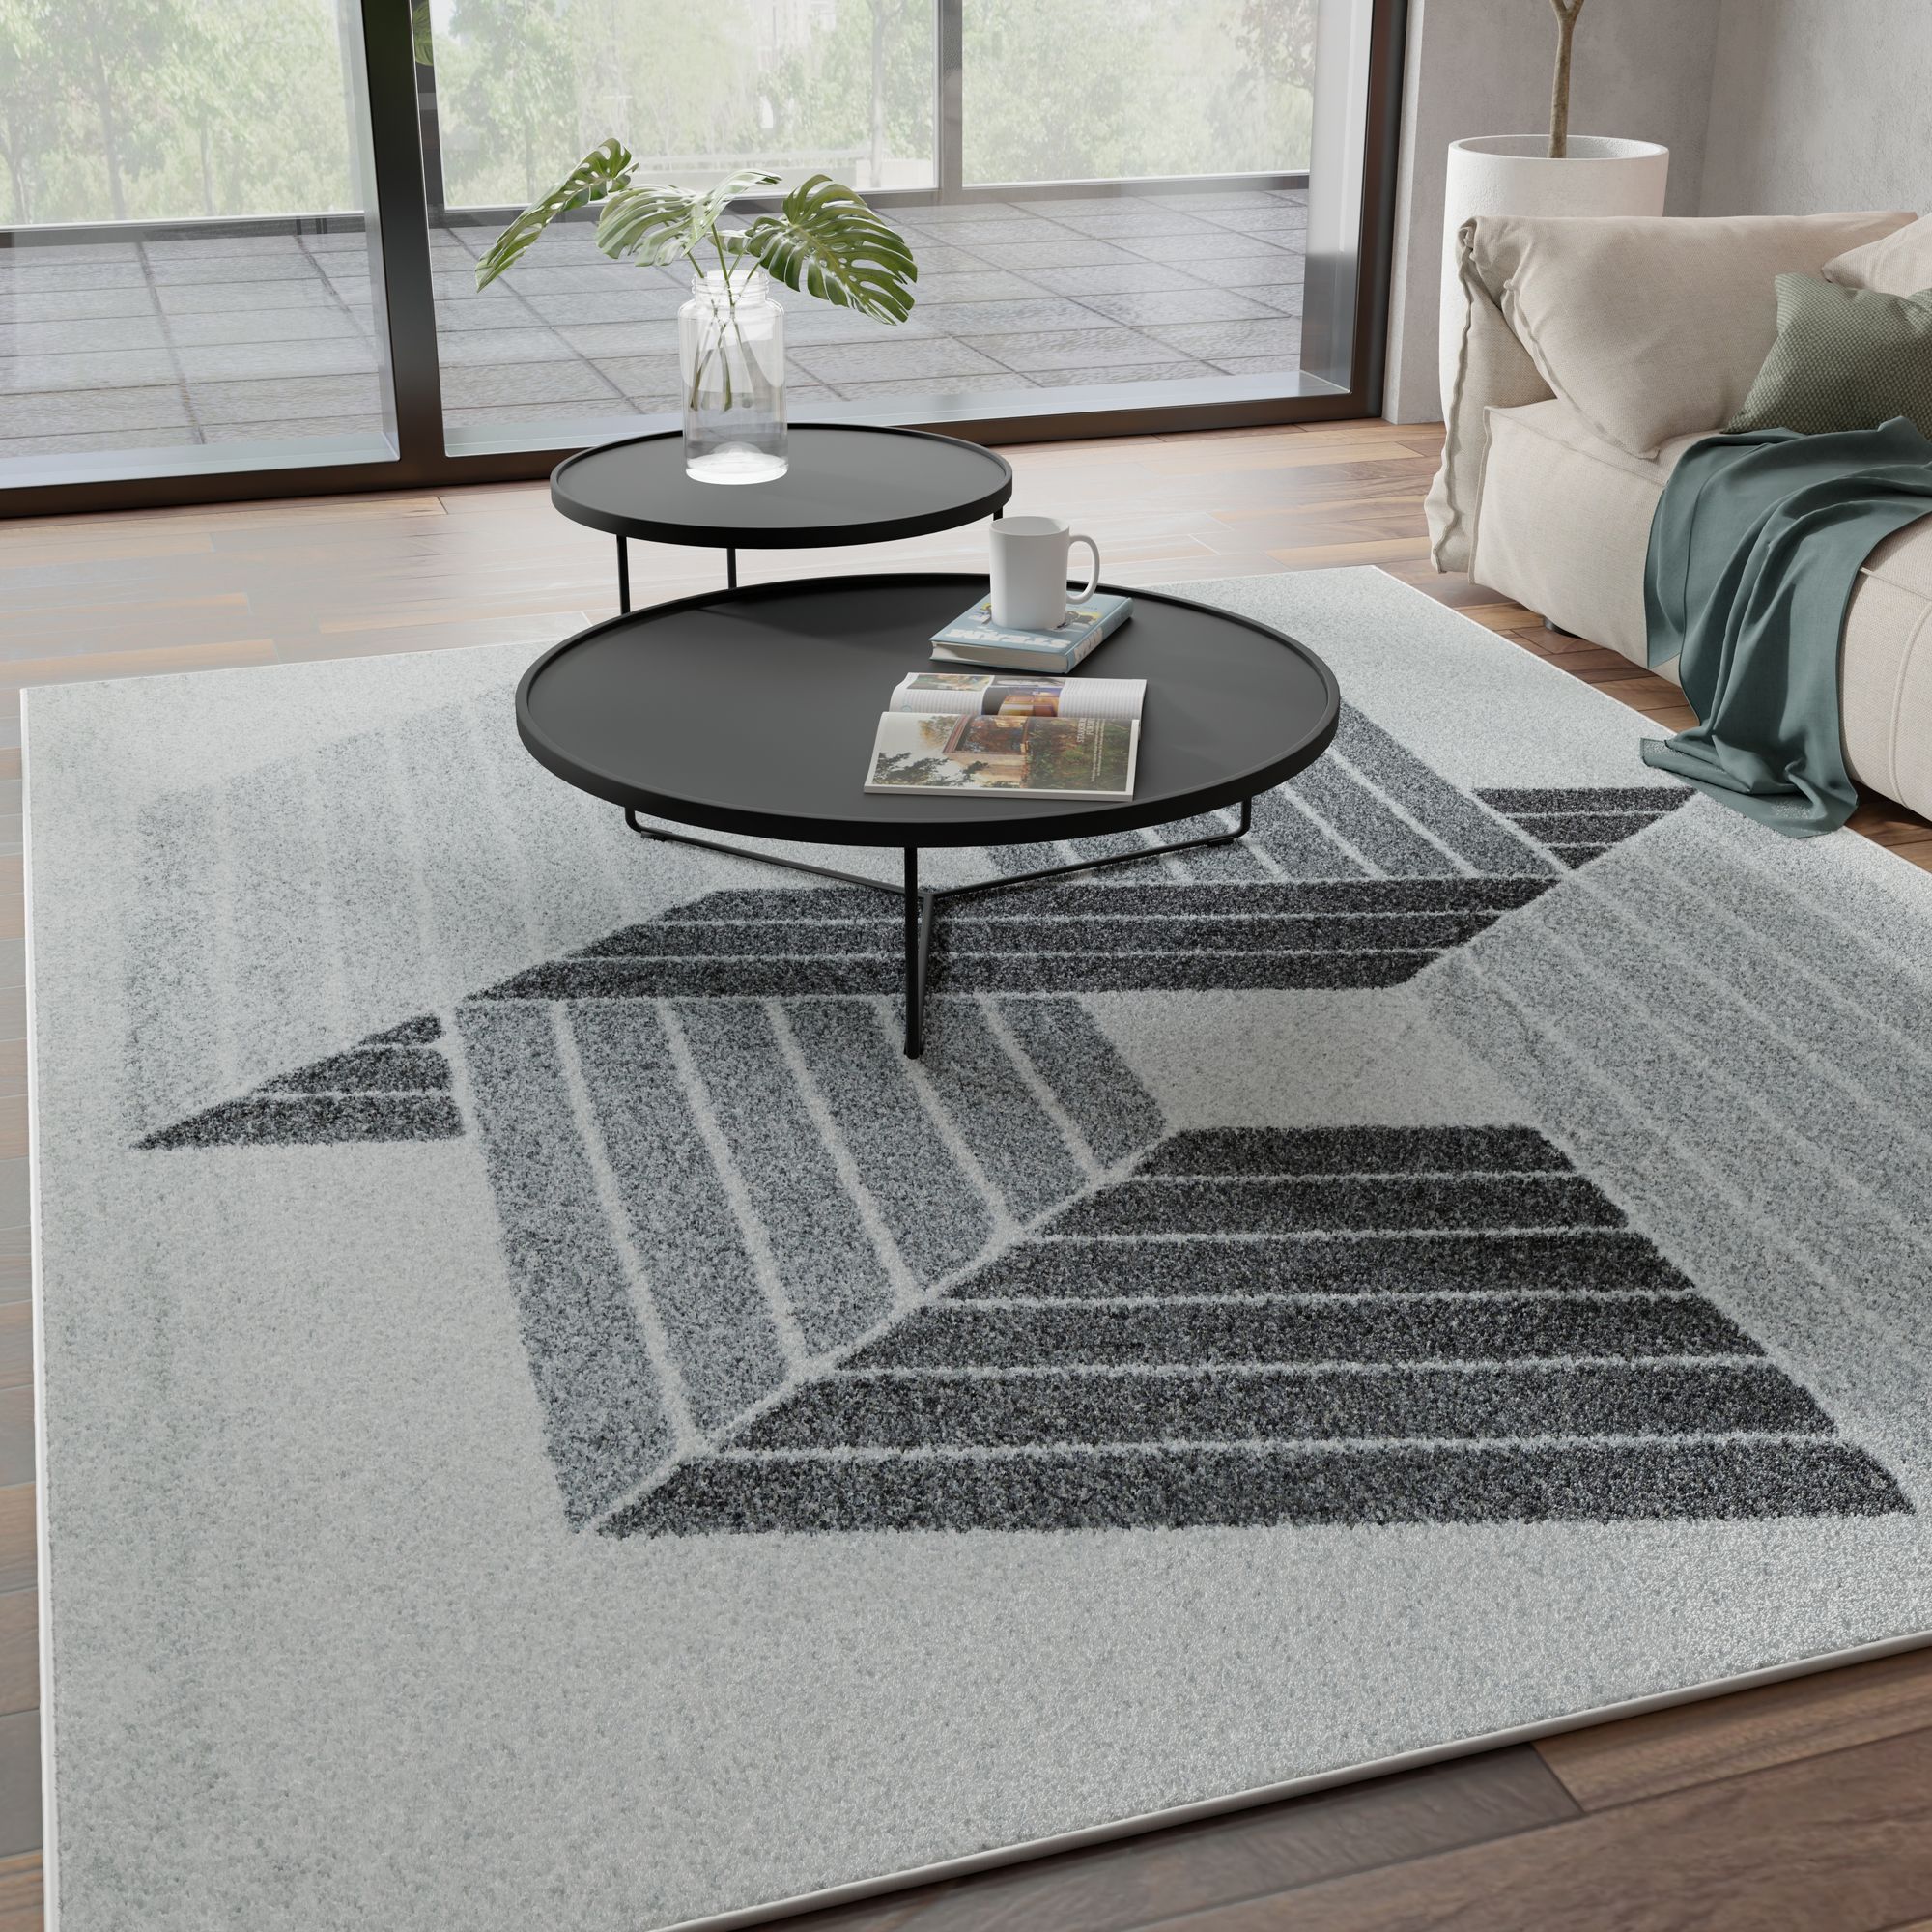 Modern living room with large windows, two black round coffee tables, and a black and gray geometric-patterned rug on a light floor.